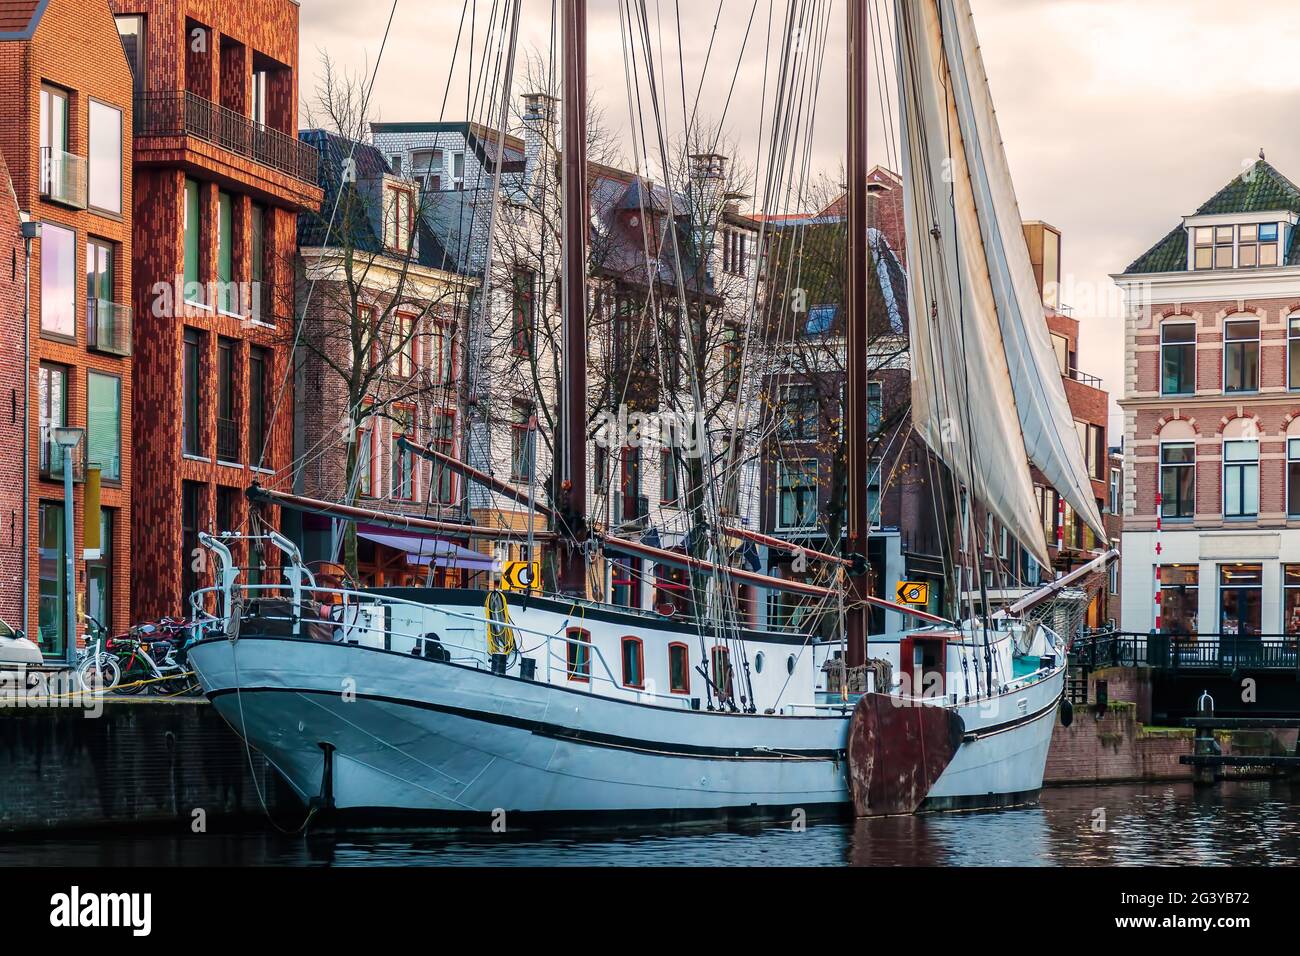 Old sailboat in a canal in the city center of Groningen, The Netherlands Stock Photo